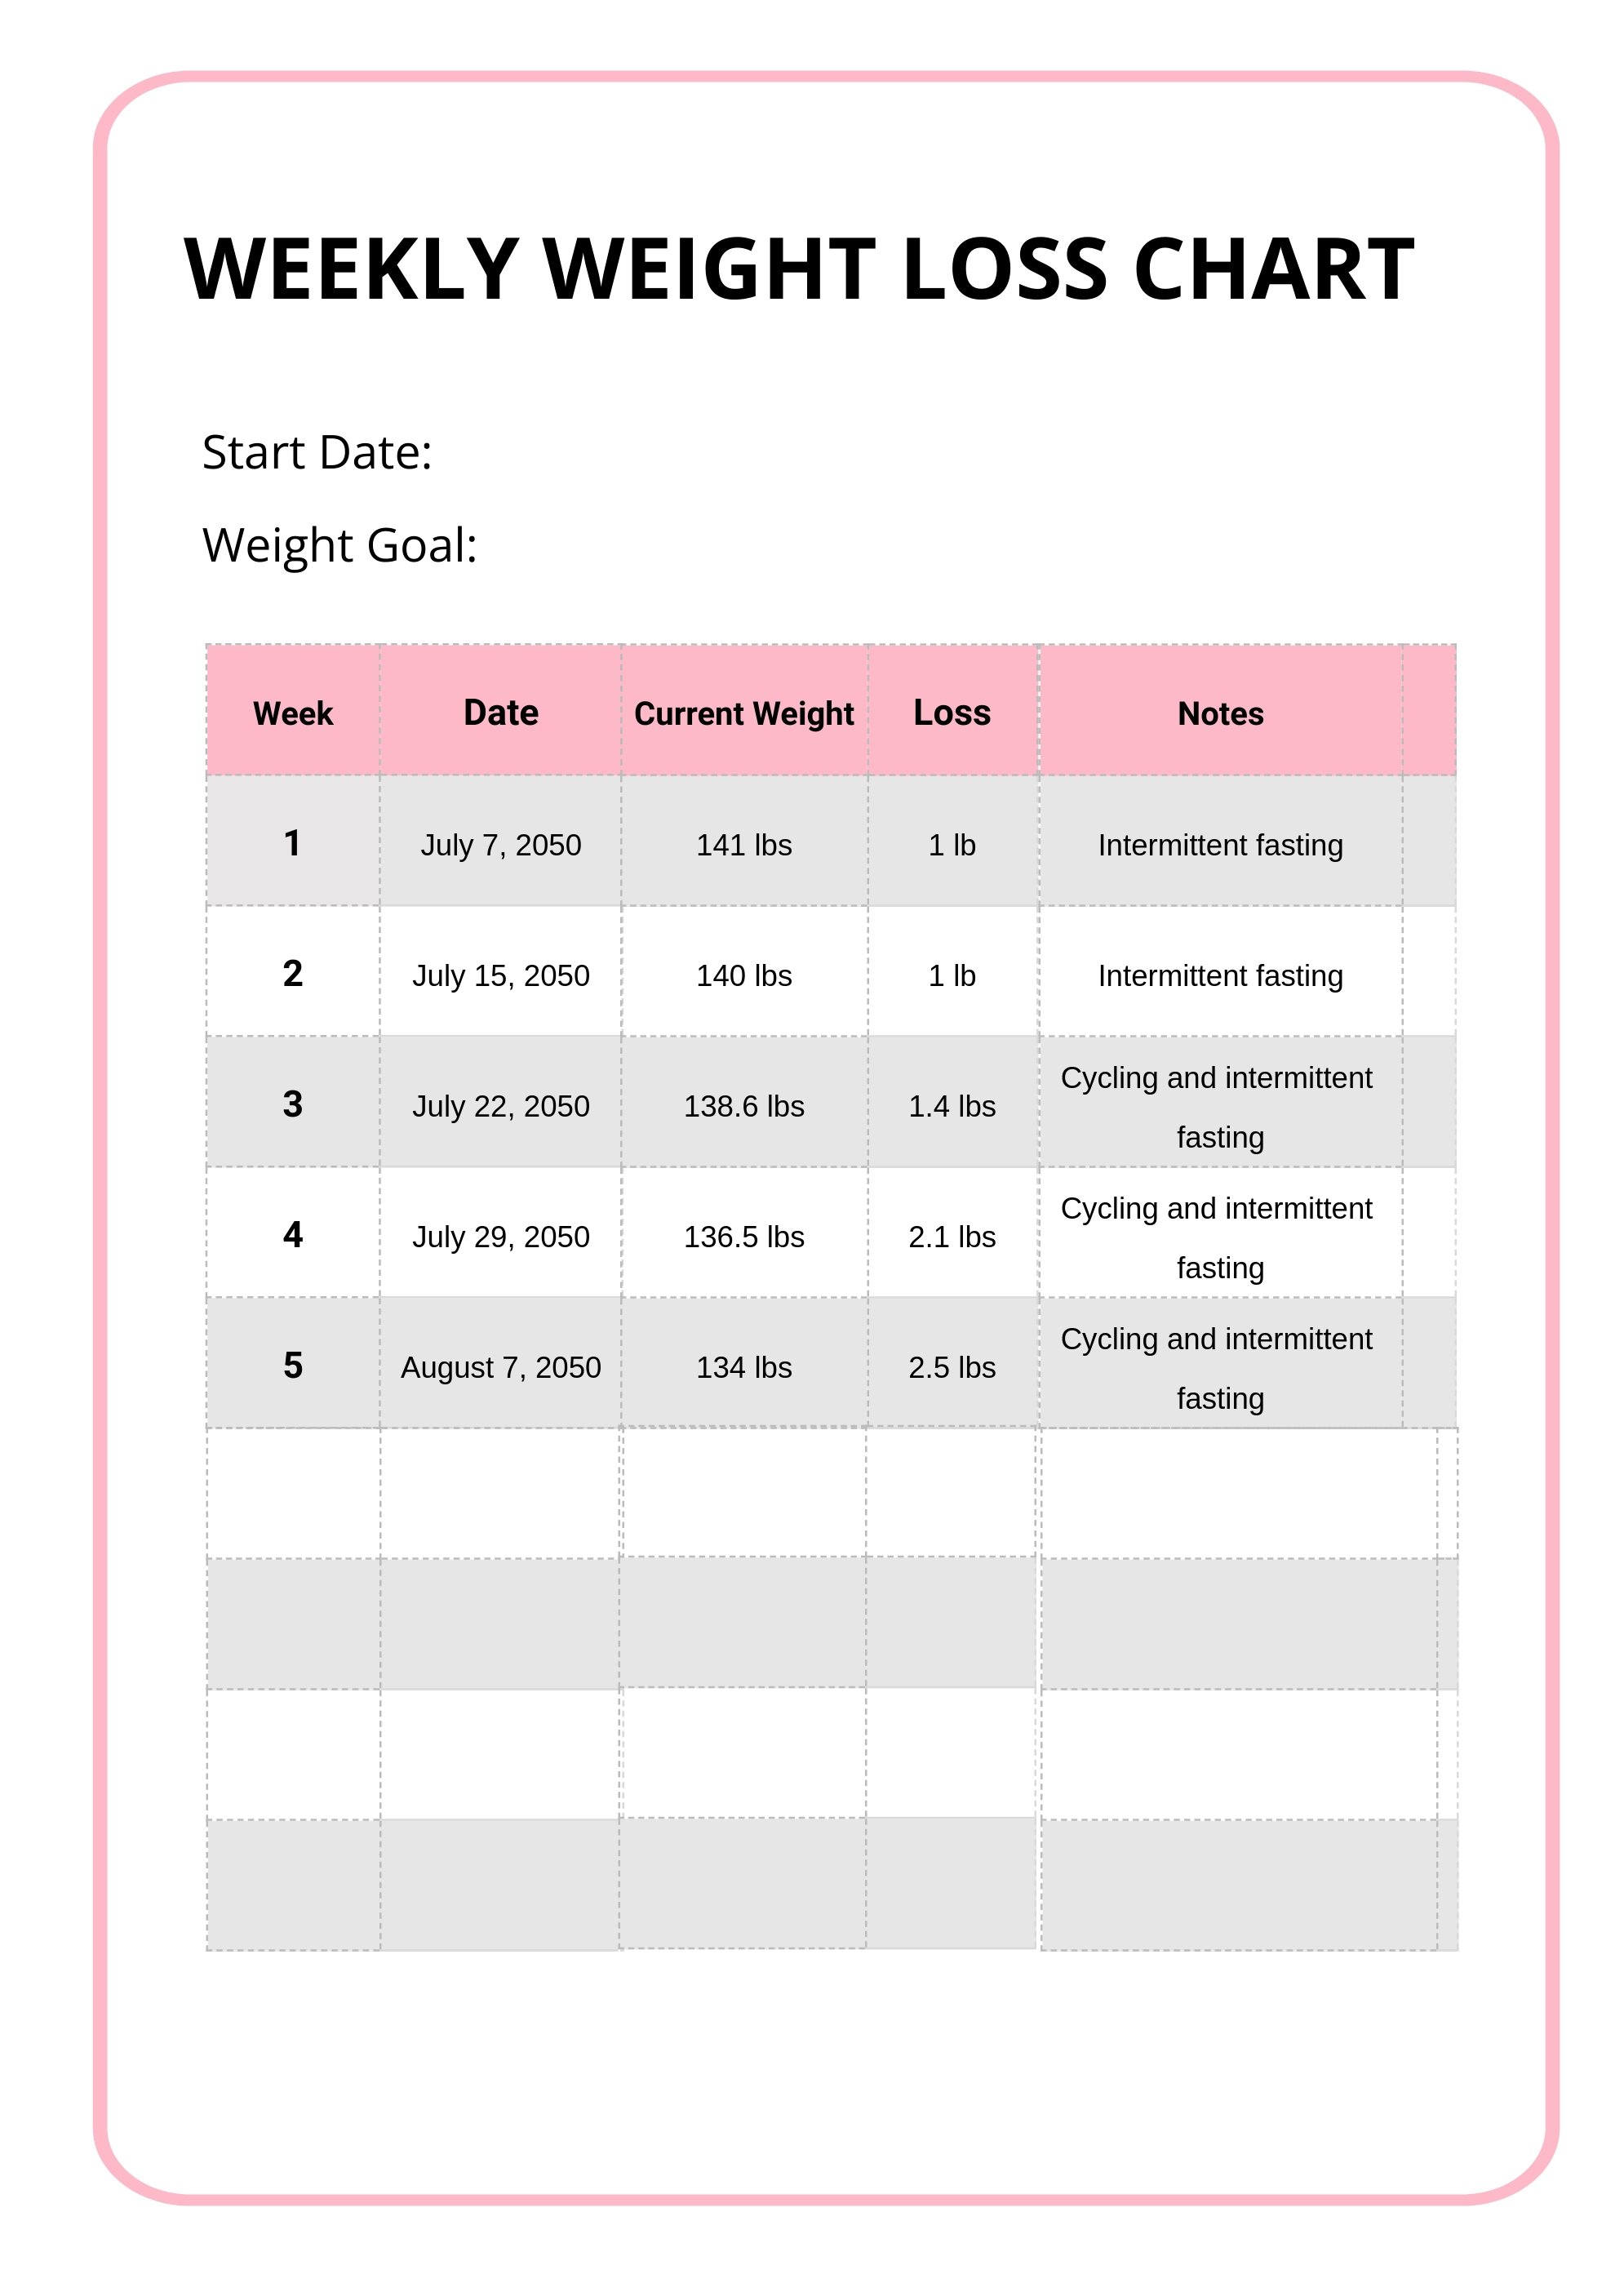 Weekly Weight Loss Chart in PDF, Illustrator